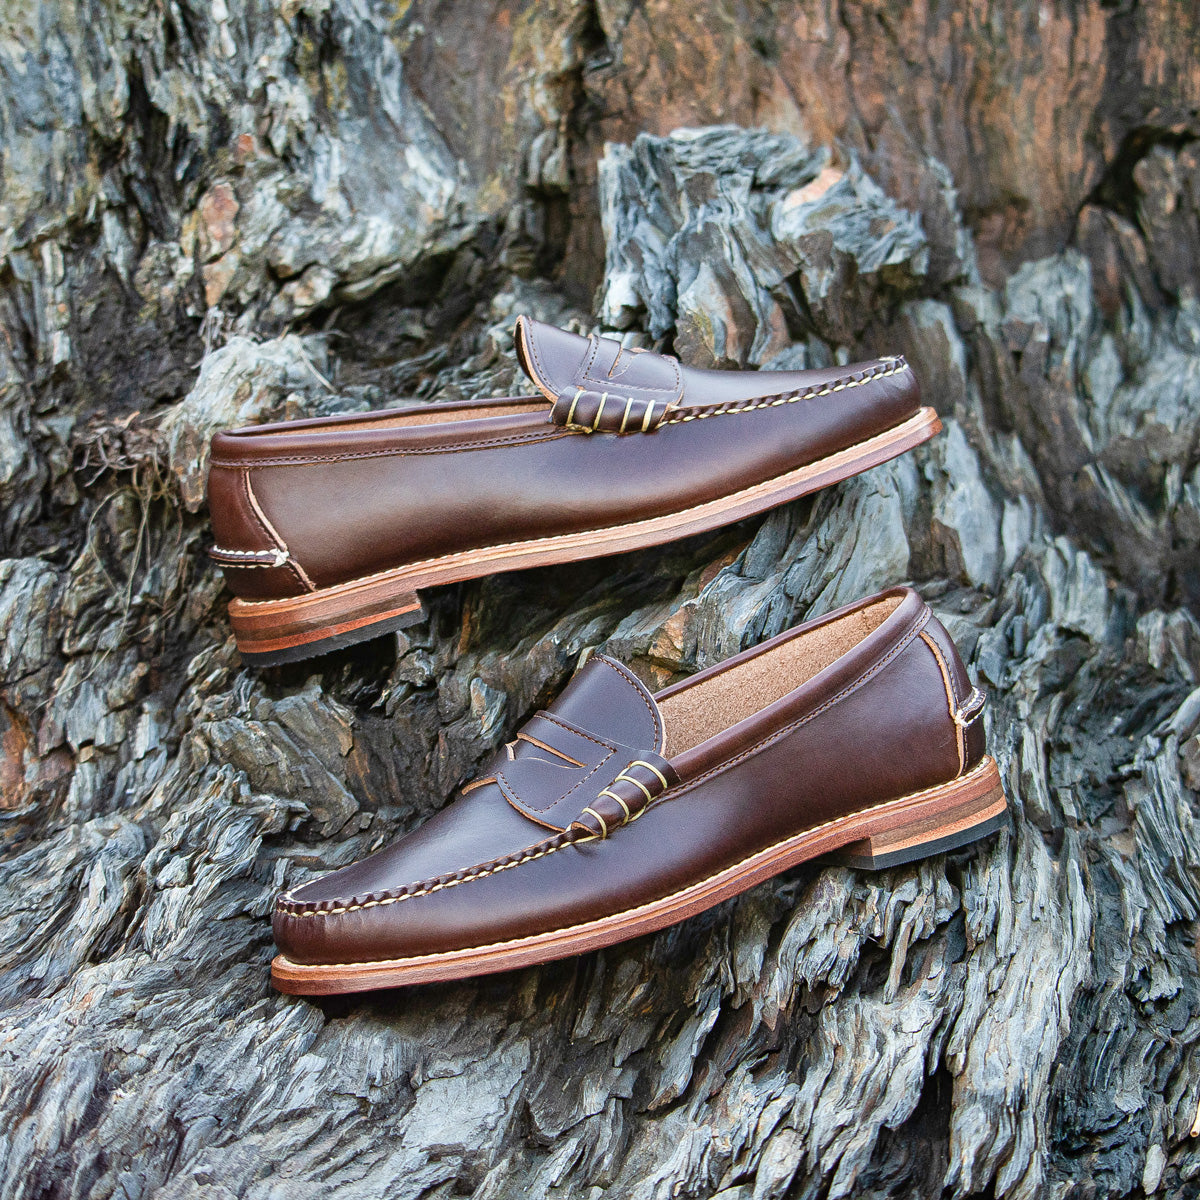 Weltline Penny Loafers - Dark Brown Calf, Rancourt & Co.